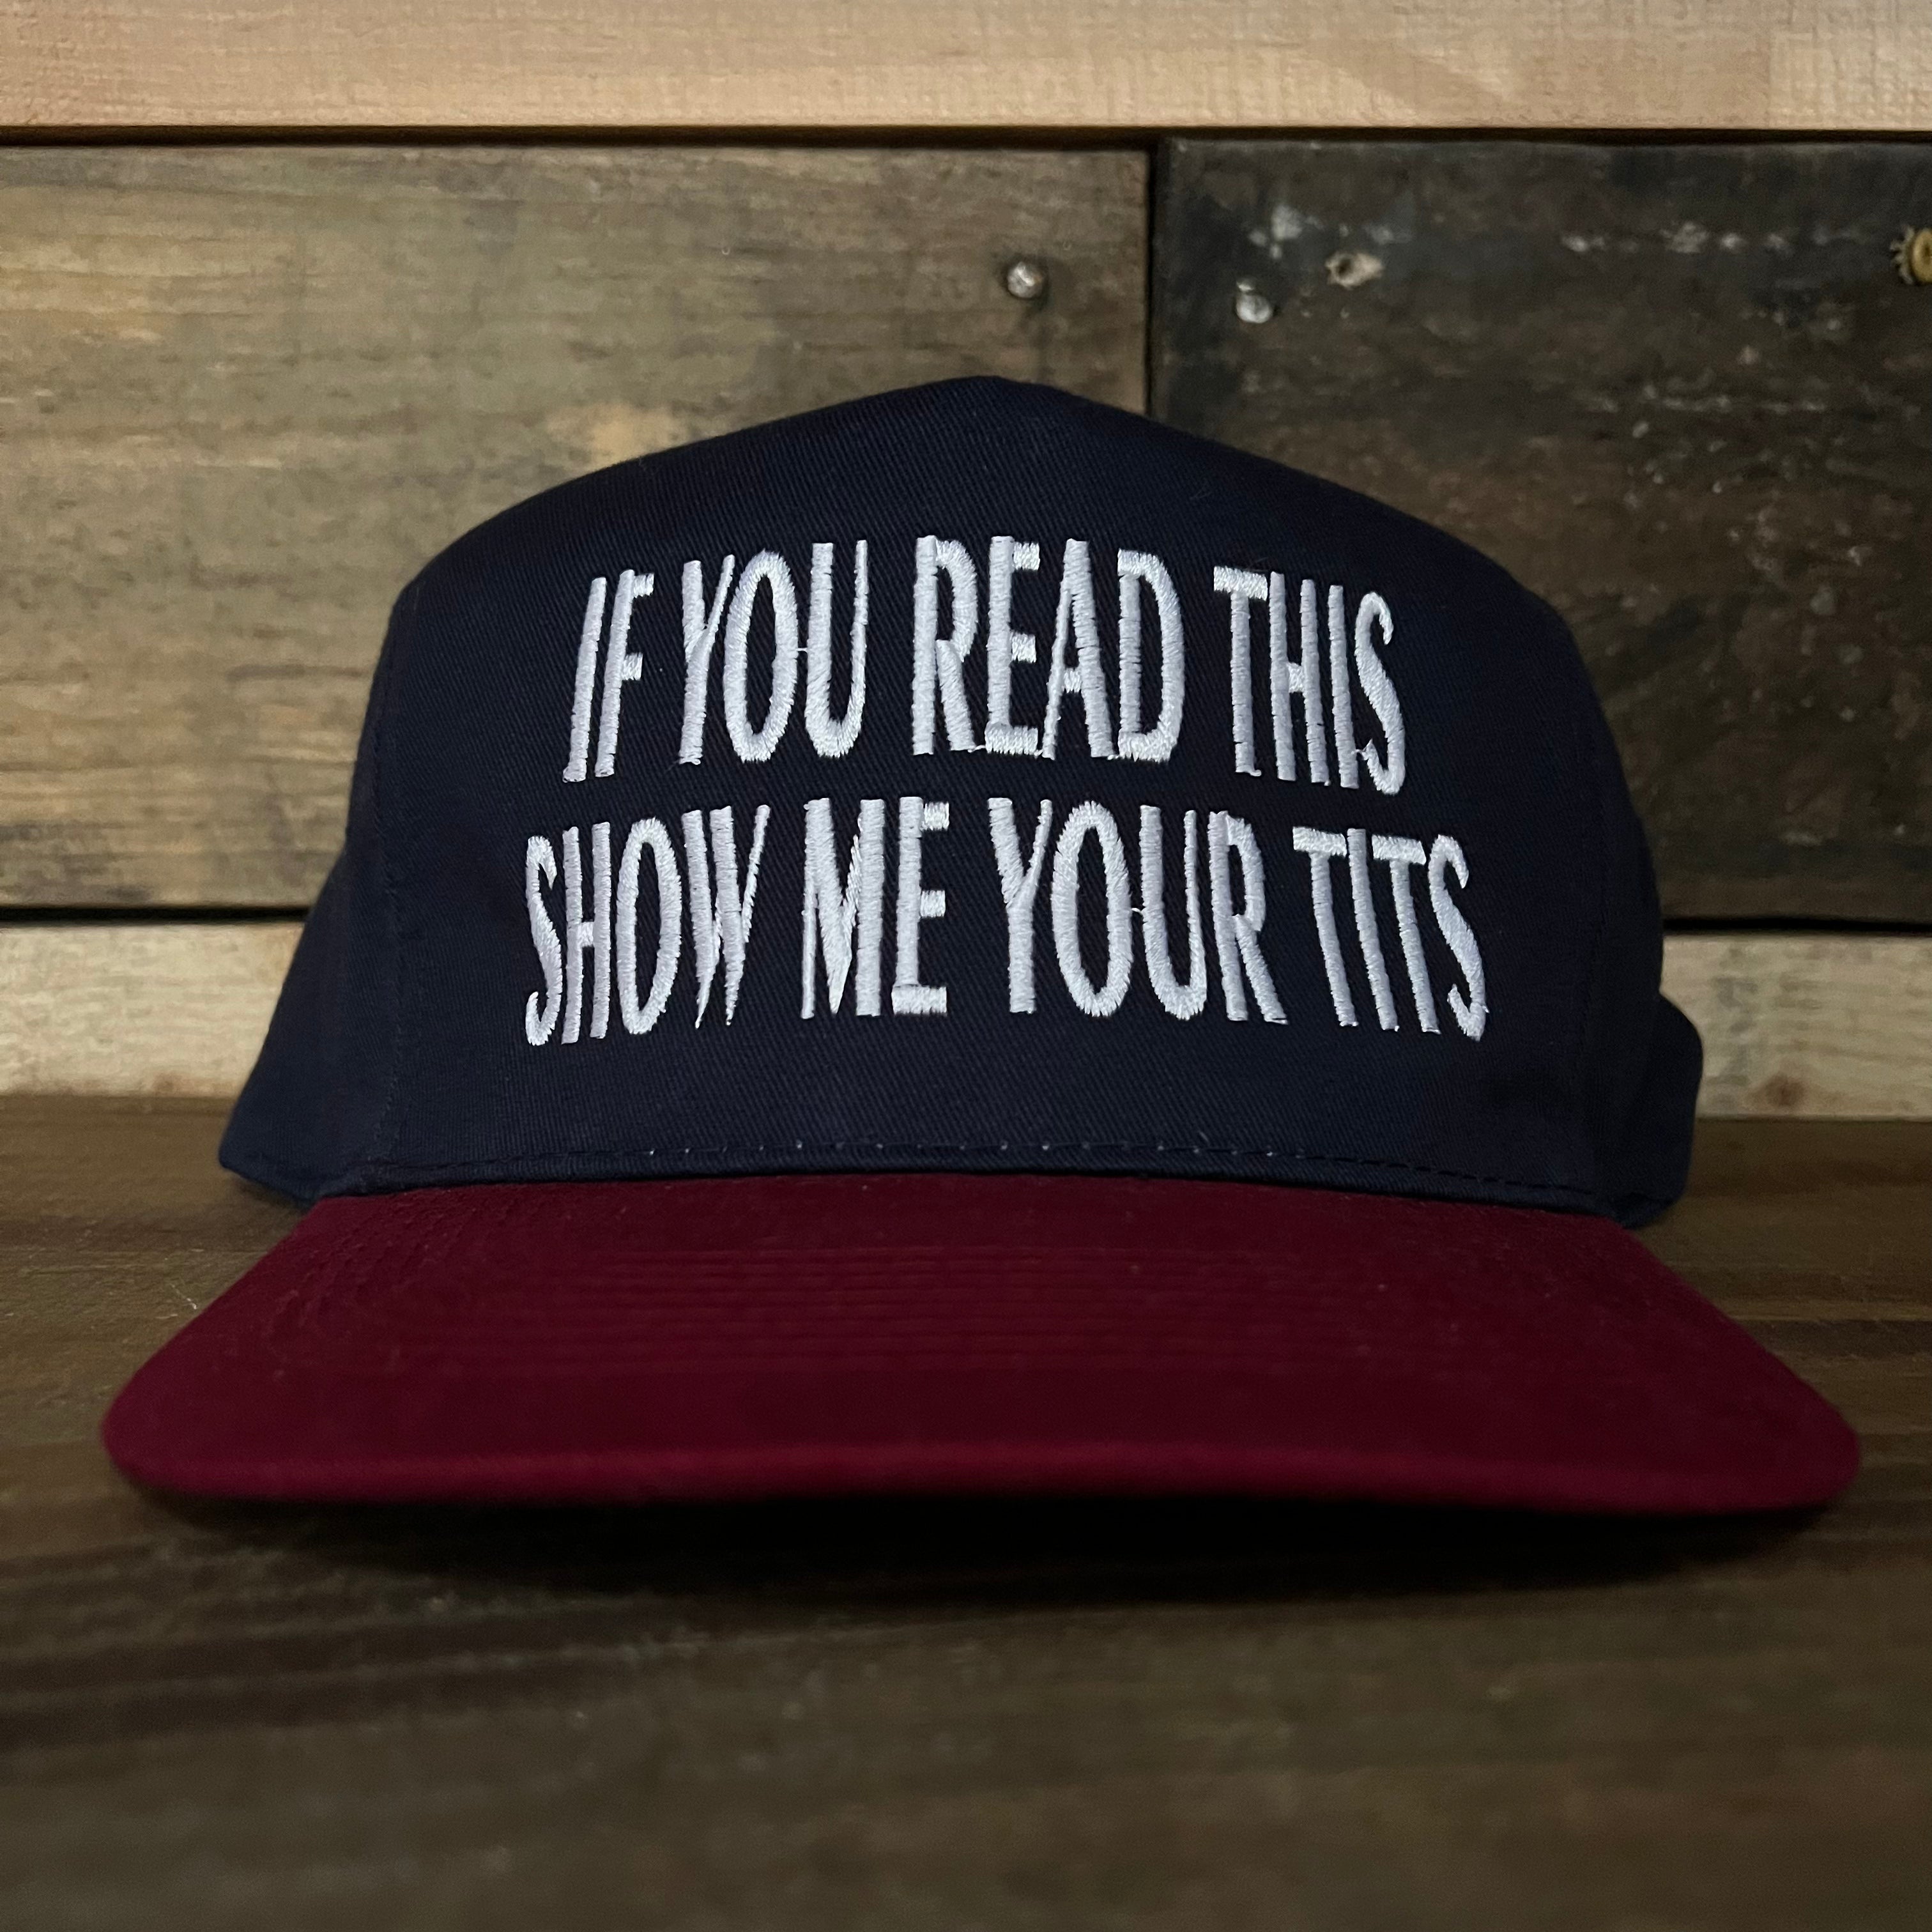 dhenver zarate recommends show your tits pic